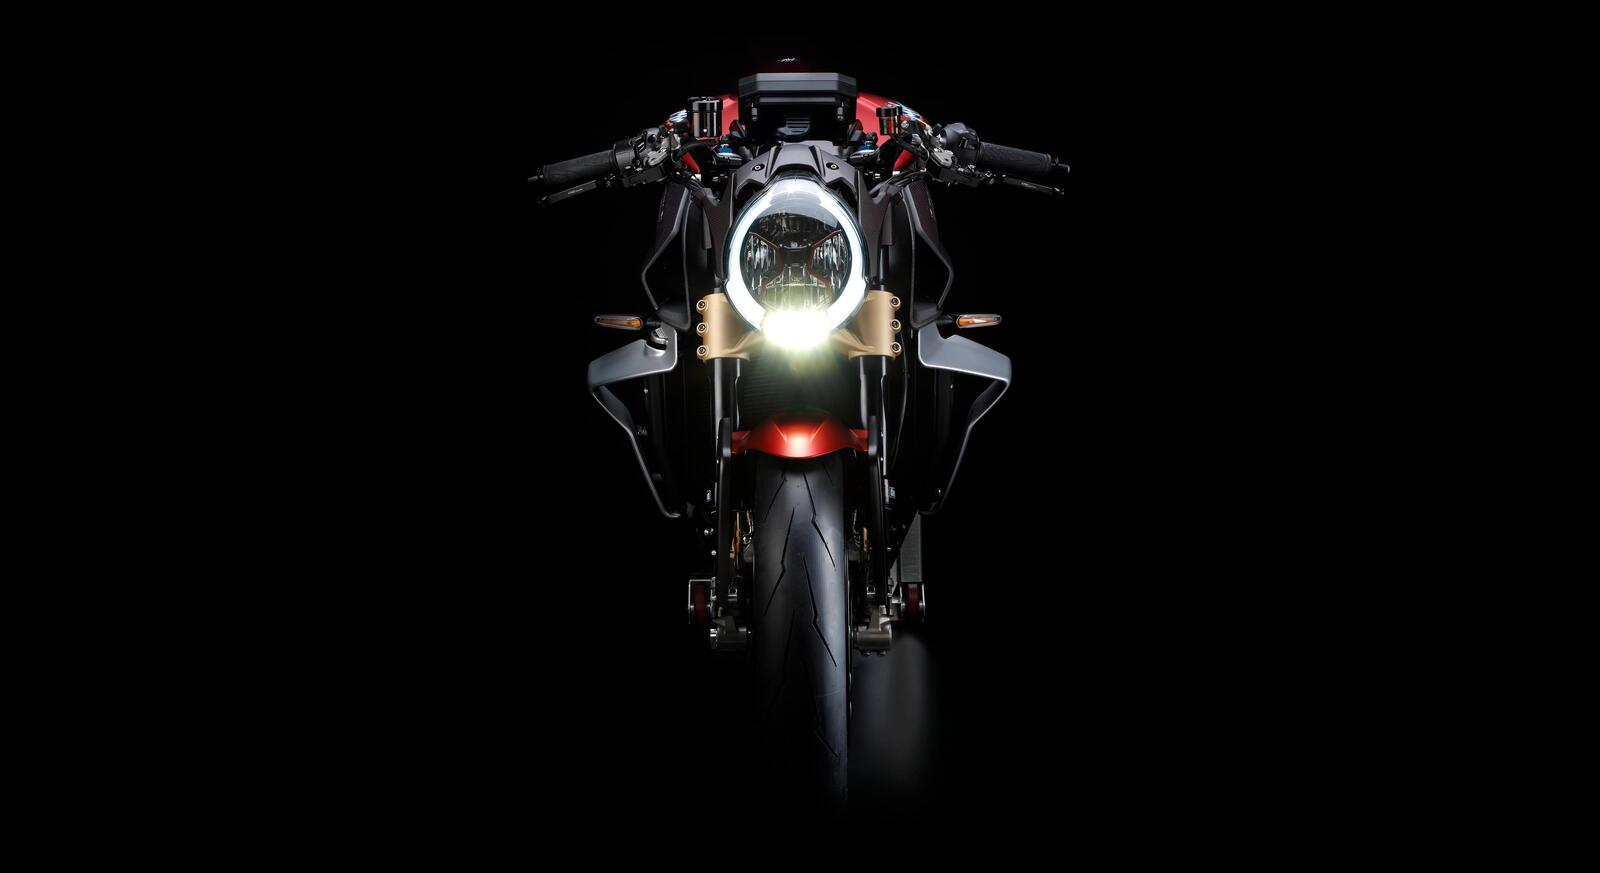 Wallpapers front view motorcycle wallpaper mv agusta brutale 1000 serie oro on the desktop